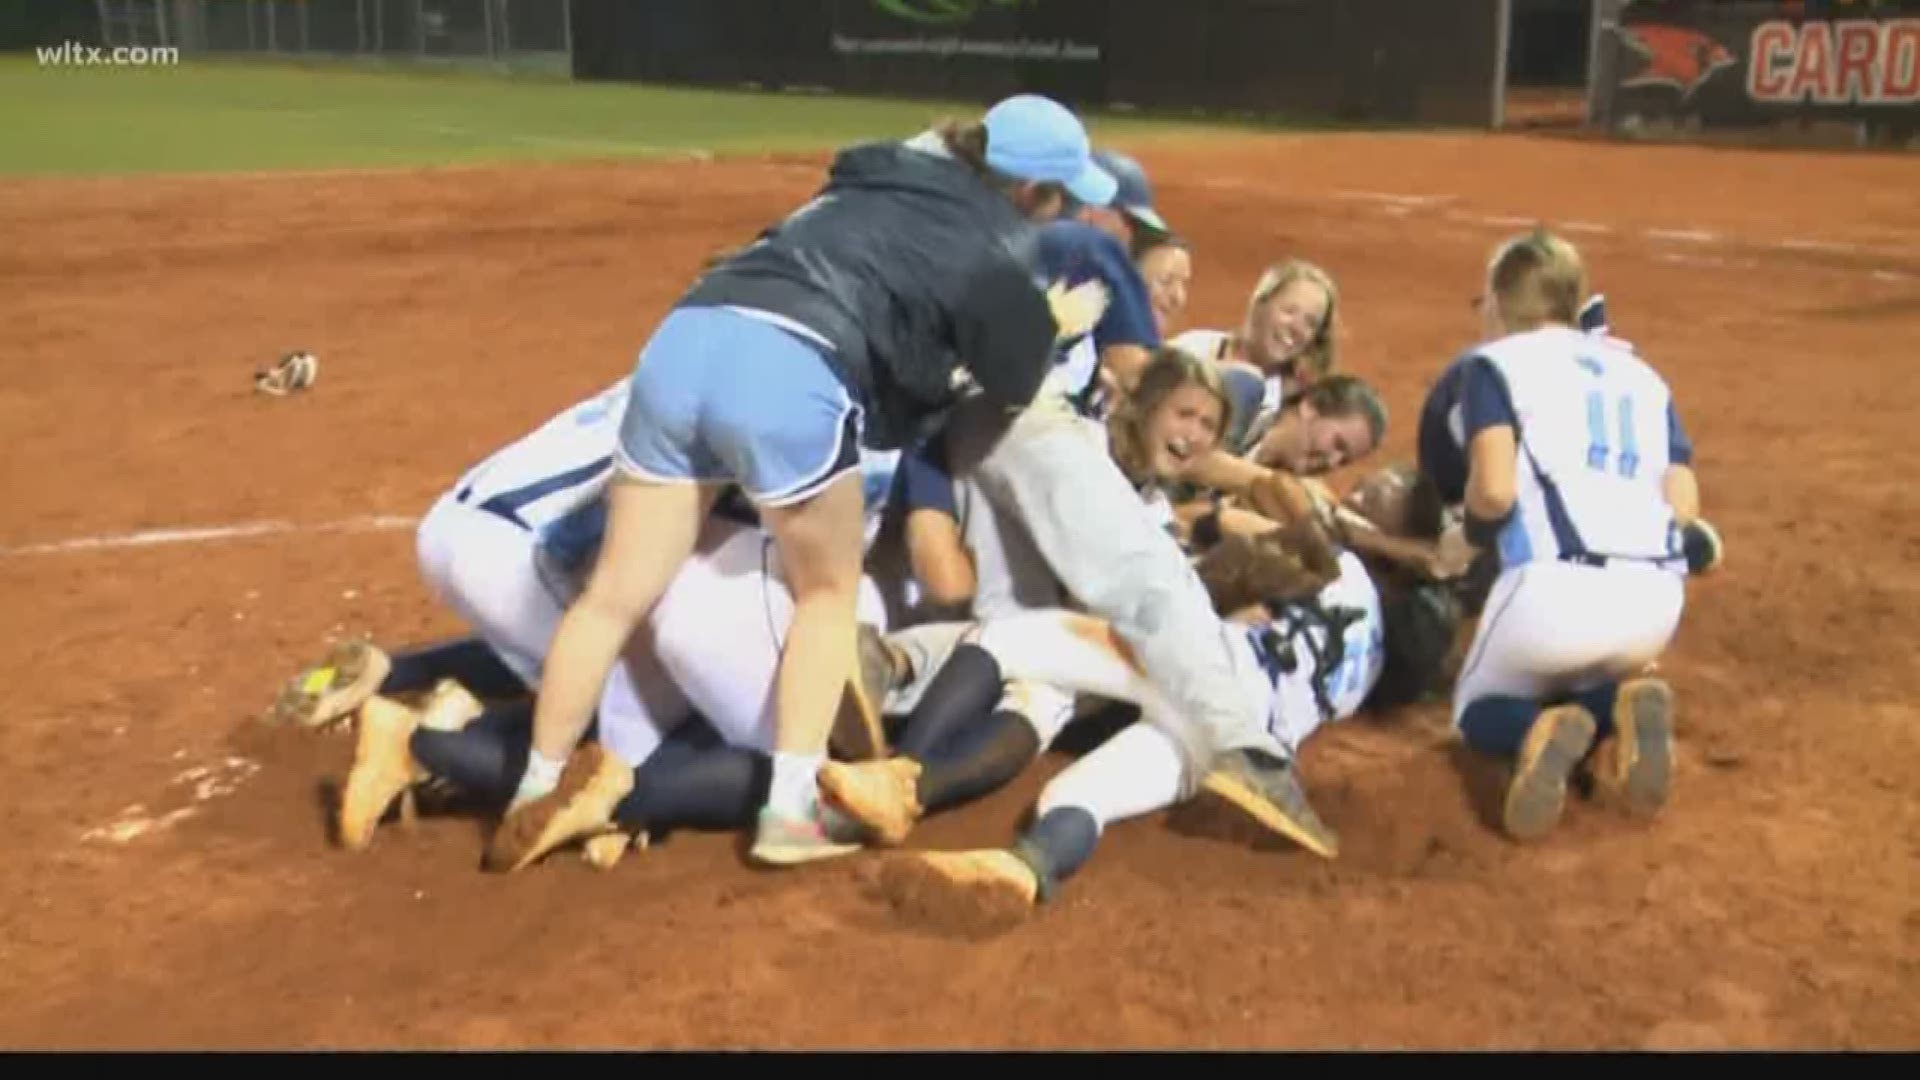 Wilson Hall scored five runs in the top of the seventh to defeat Cardinal Newman 7-3 to sweep the SCISA 3A state softball championship.